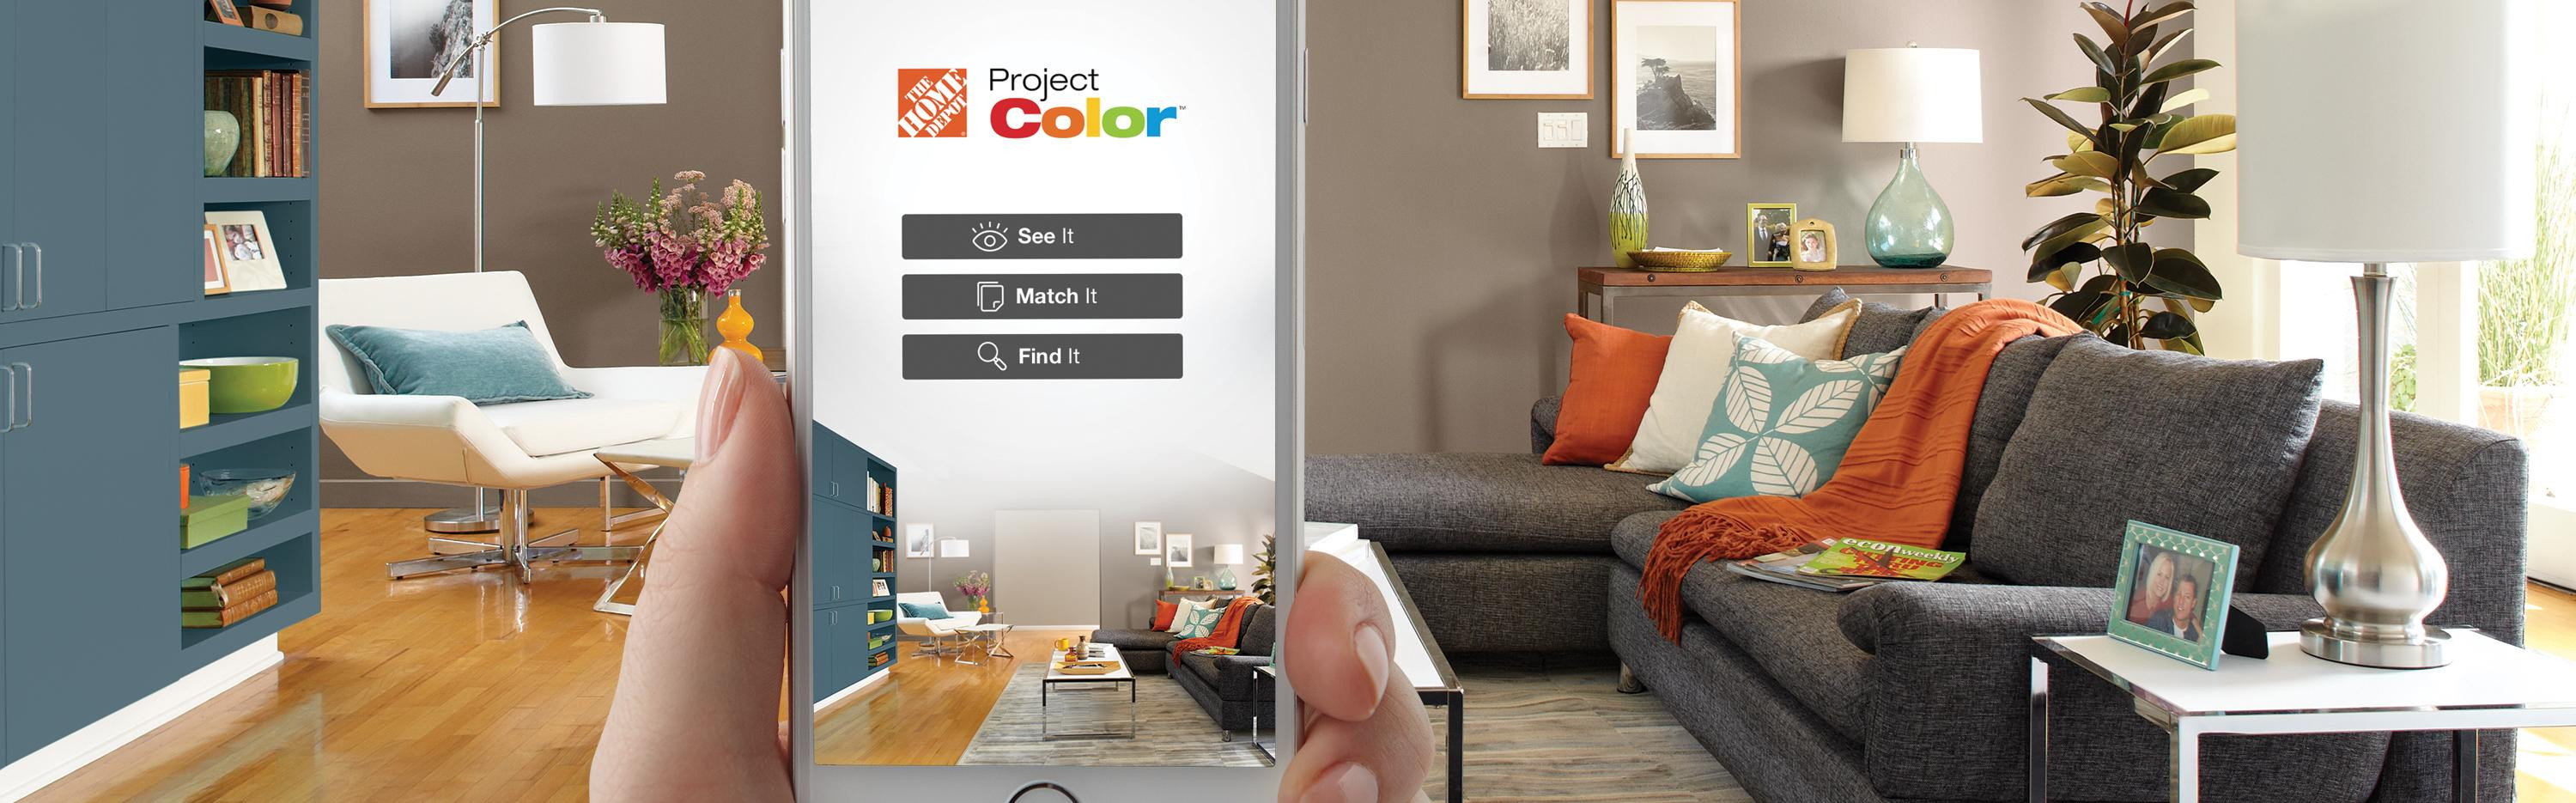 27 attractive Hardwood Floor Paint Colors 2024 free download hardwood floor paint colors of the home depot new technology shows you the perfect paint color throughout thd project color app on an iphone